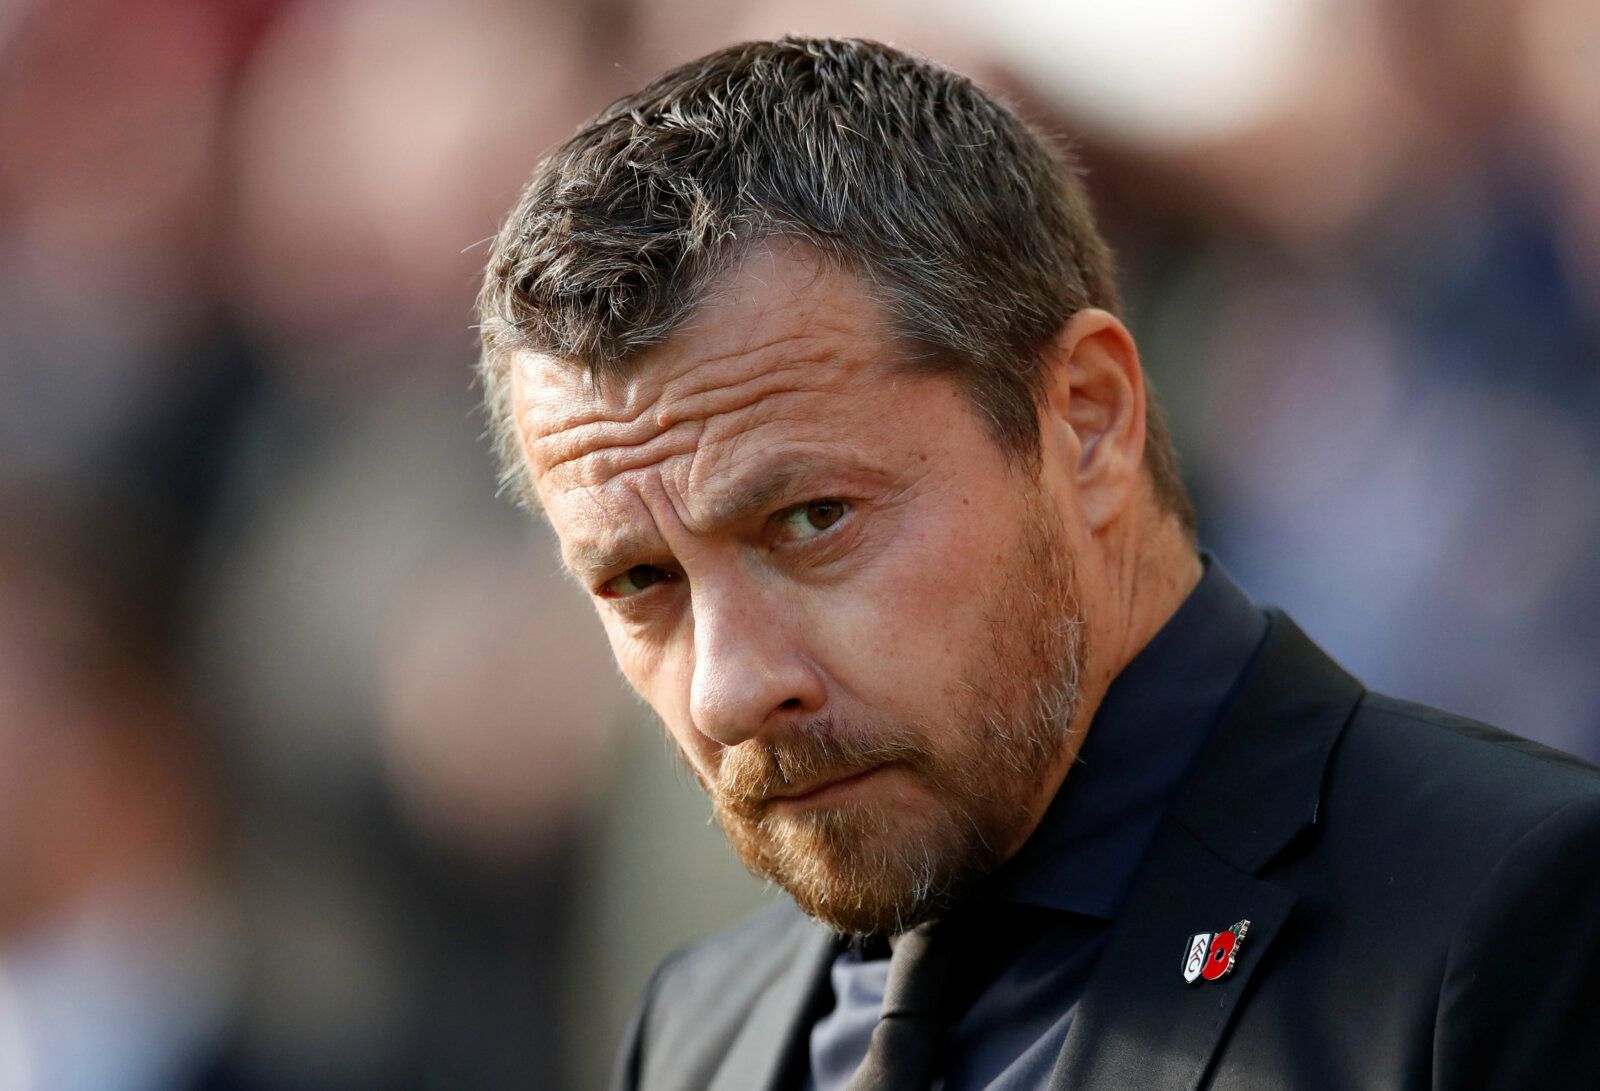 Soccer Football - Premier League - Liverpool v Fulham - Anfield, Liverpool, Britain - November 11, 2018  Fulham manager Slavisa Jokanovic           Action Images via Reuters/Andrew Boyers  EDITORIAL USE ONLY. No use with unauthorized audio, video, data, fixture lists, club/league logos or "live" services. Online in-match use limited to 75 images, no video emulation. No use in betting, games or single club/league/player publications.  Please contact your account representative for further details